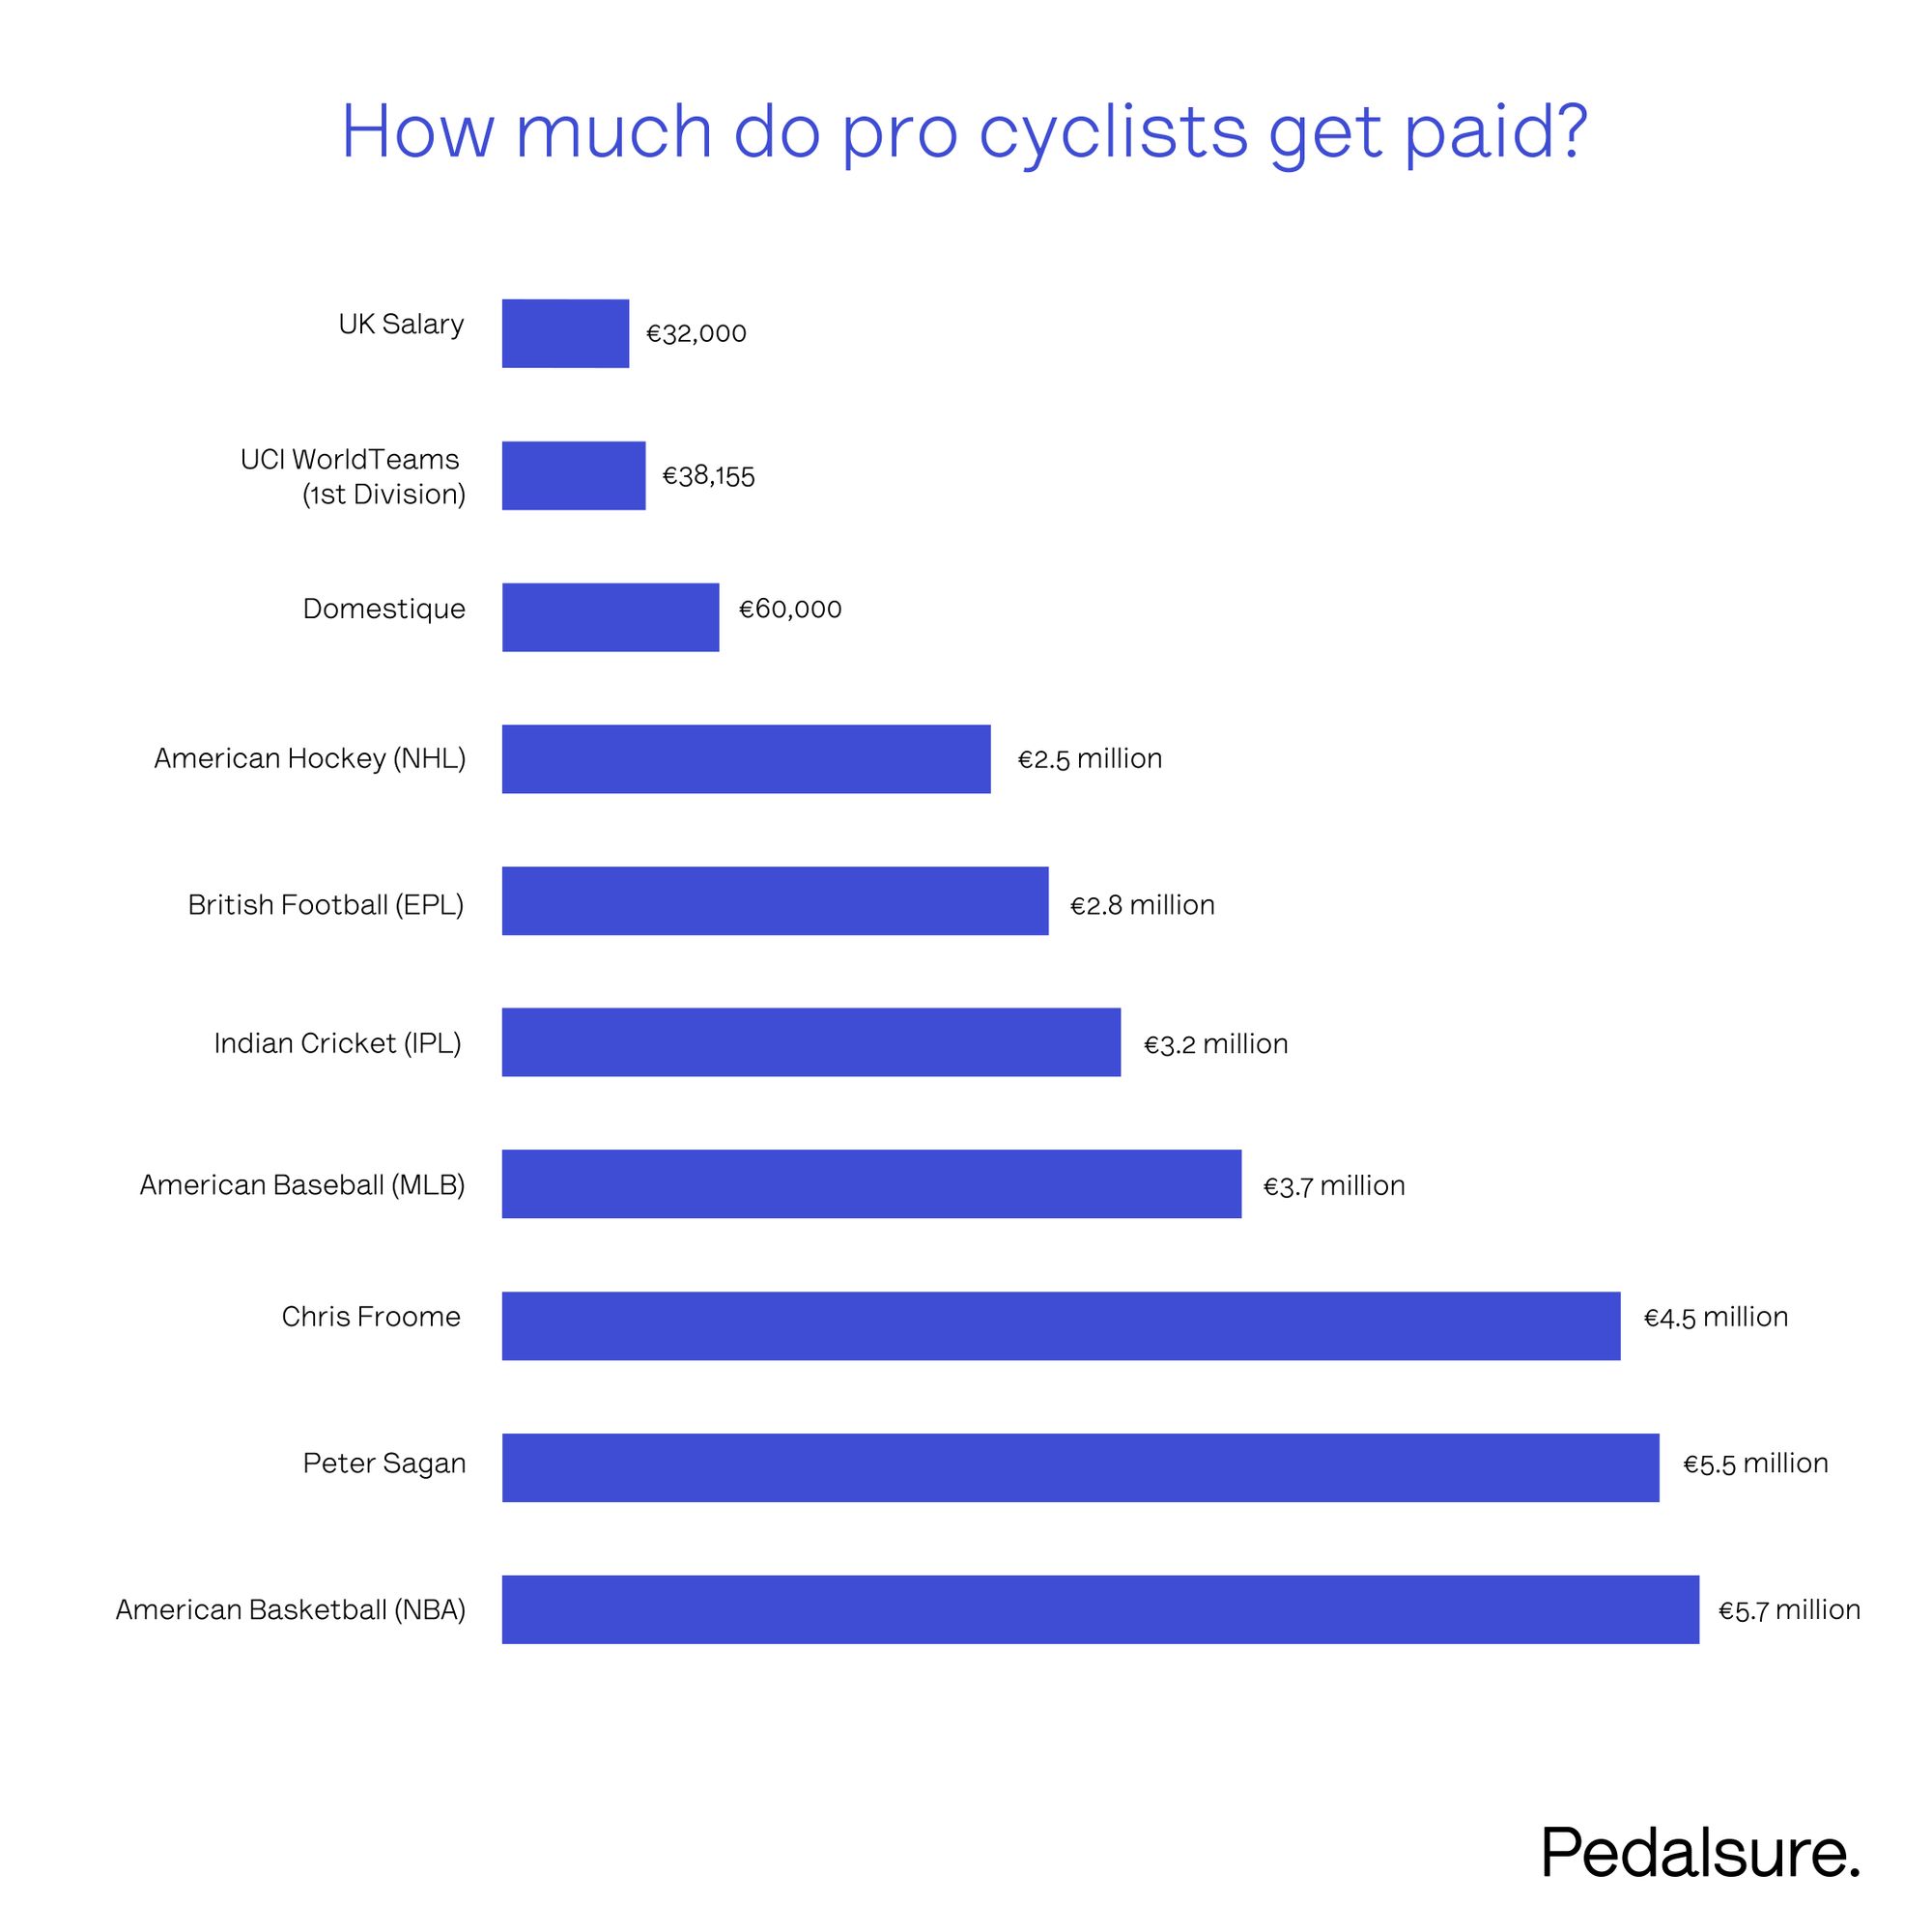 How much do pro cyclists get paid